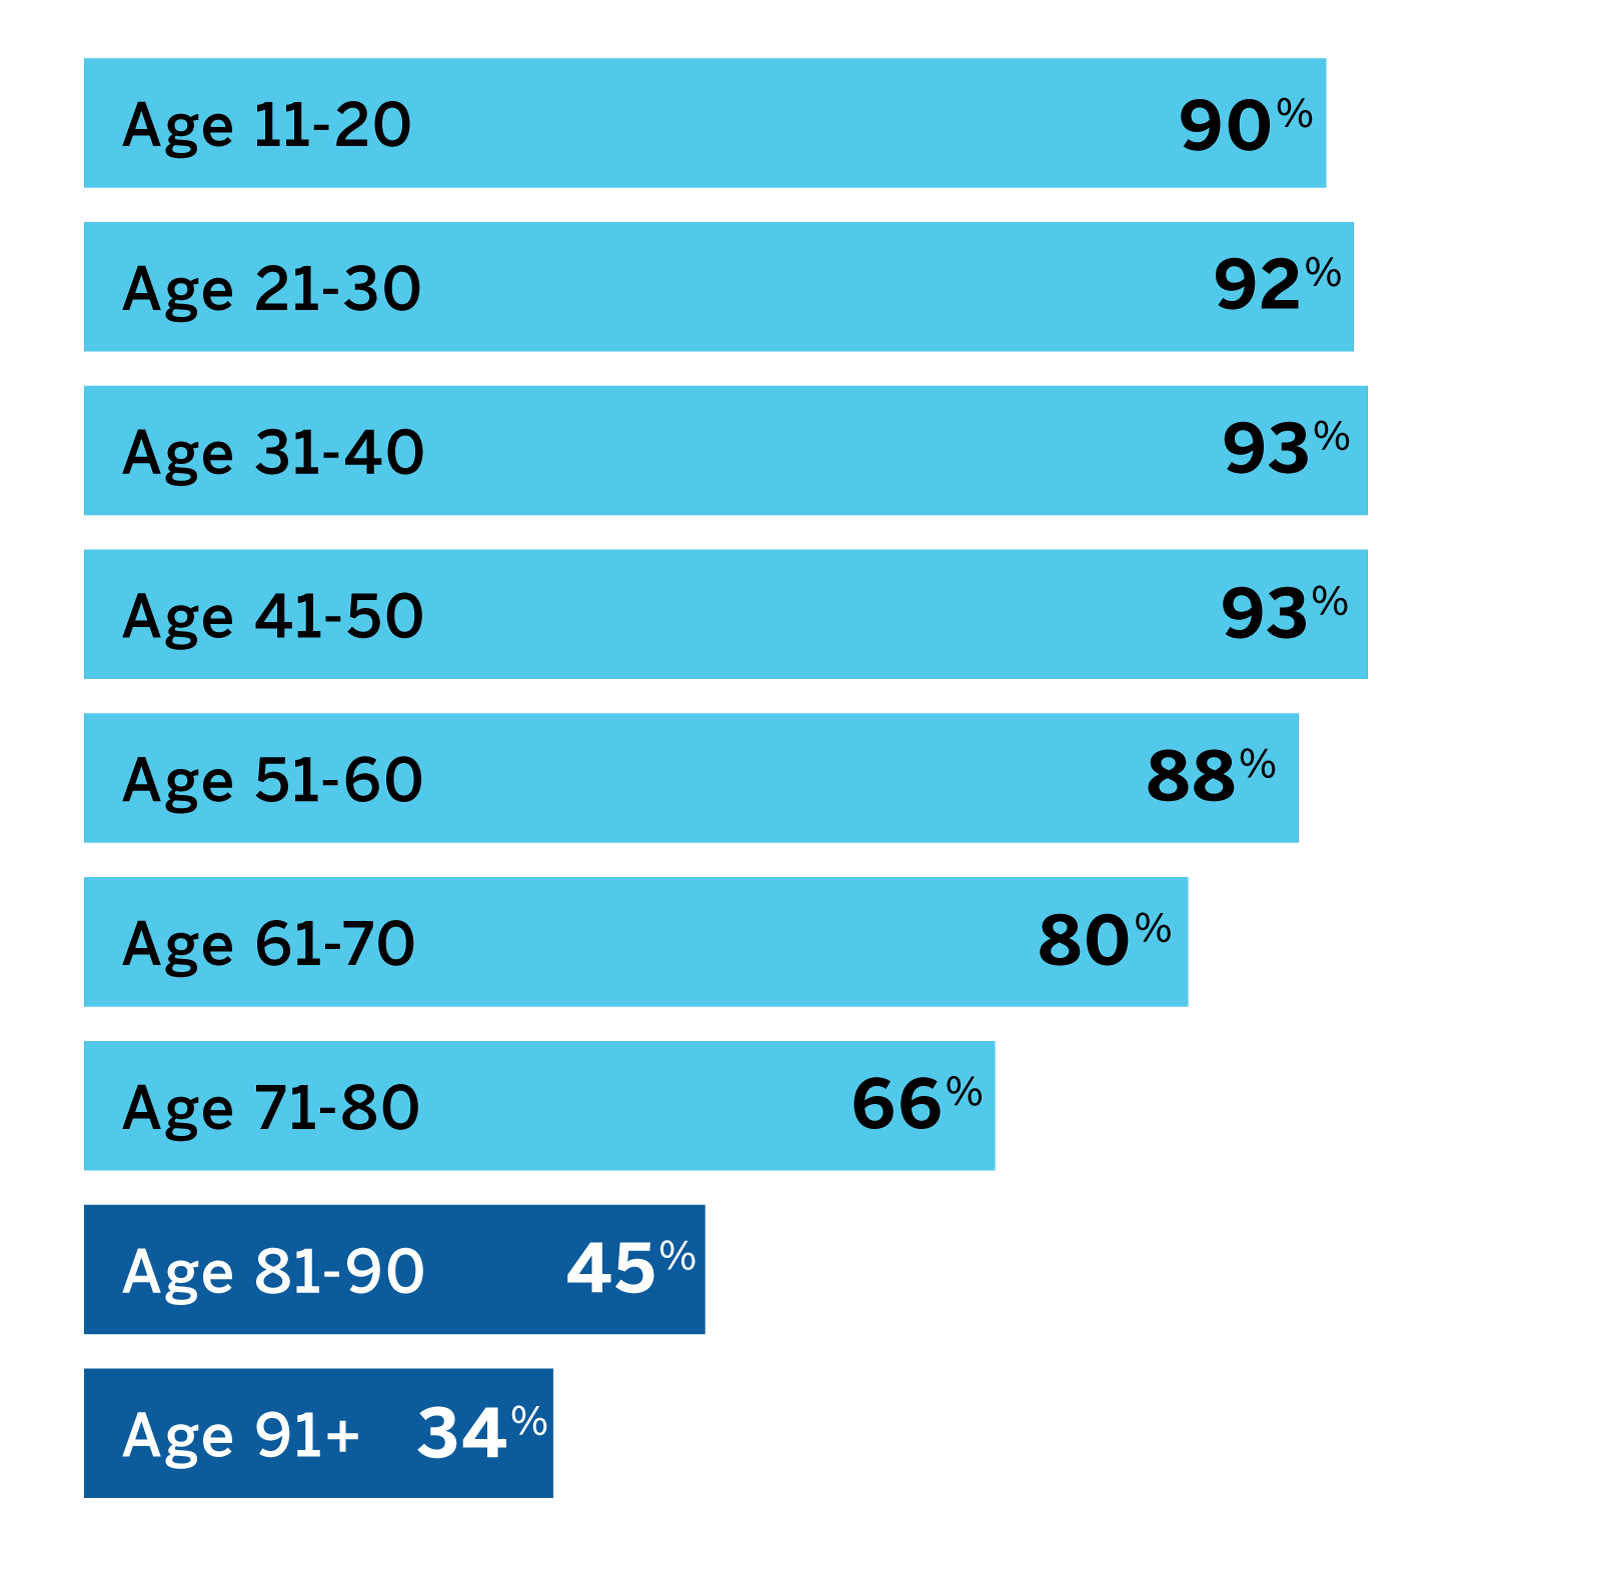 Distribution of Smartphone Ownership by Age